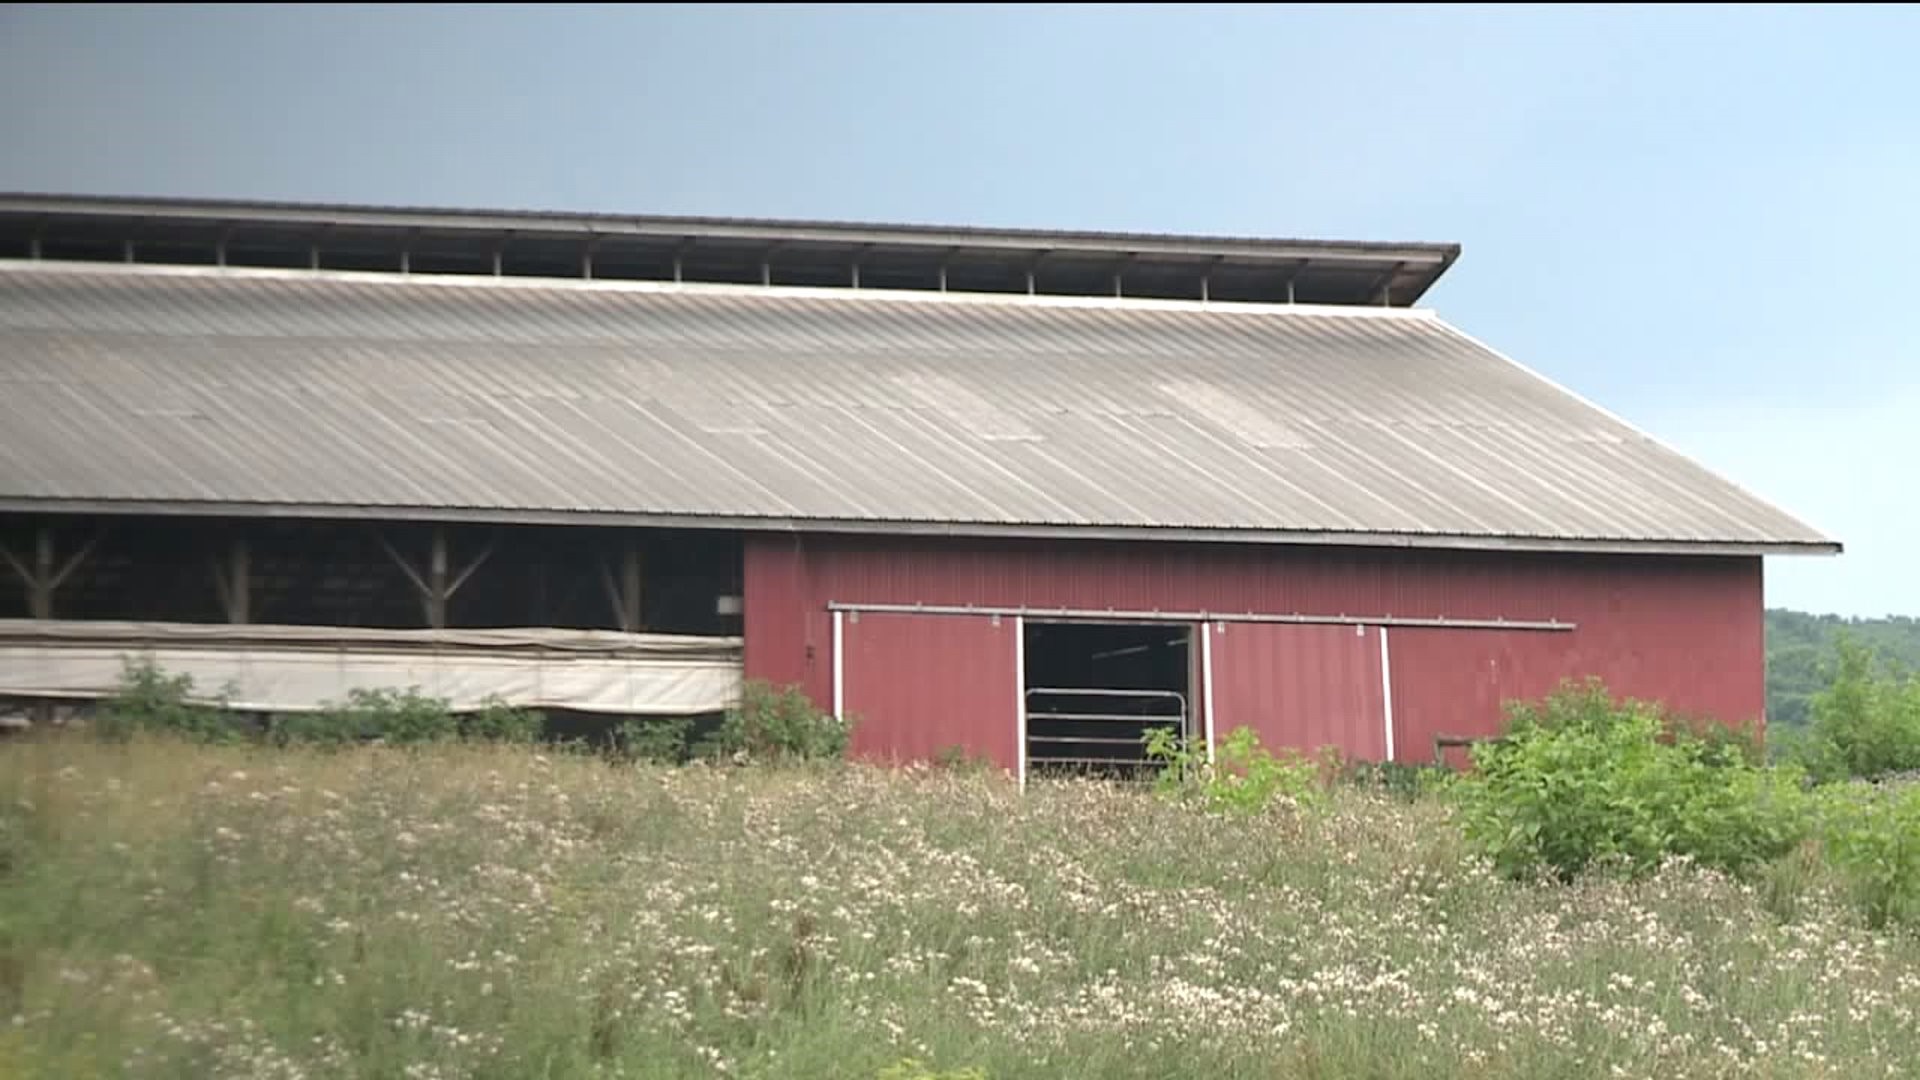 State Police: No Animal Cruelty Violations at Northumberland County Farm